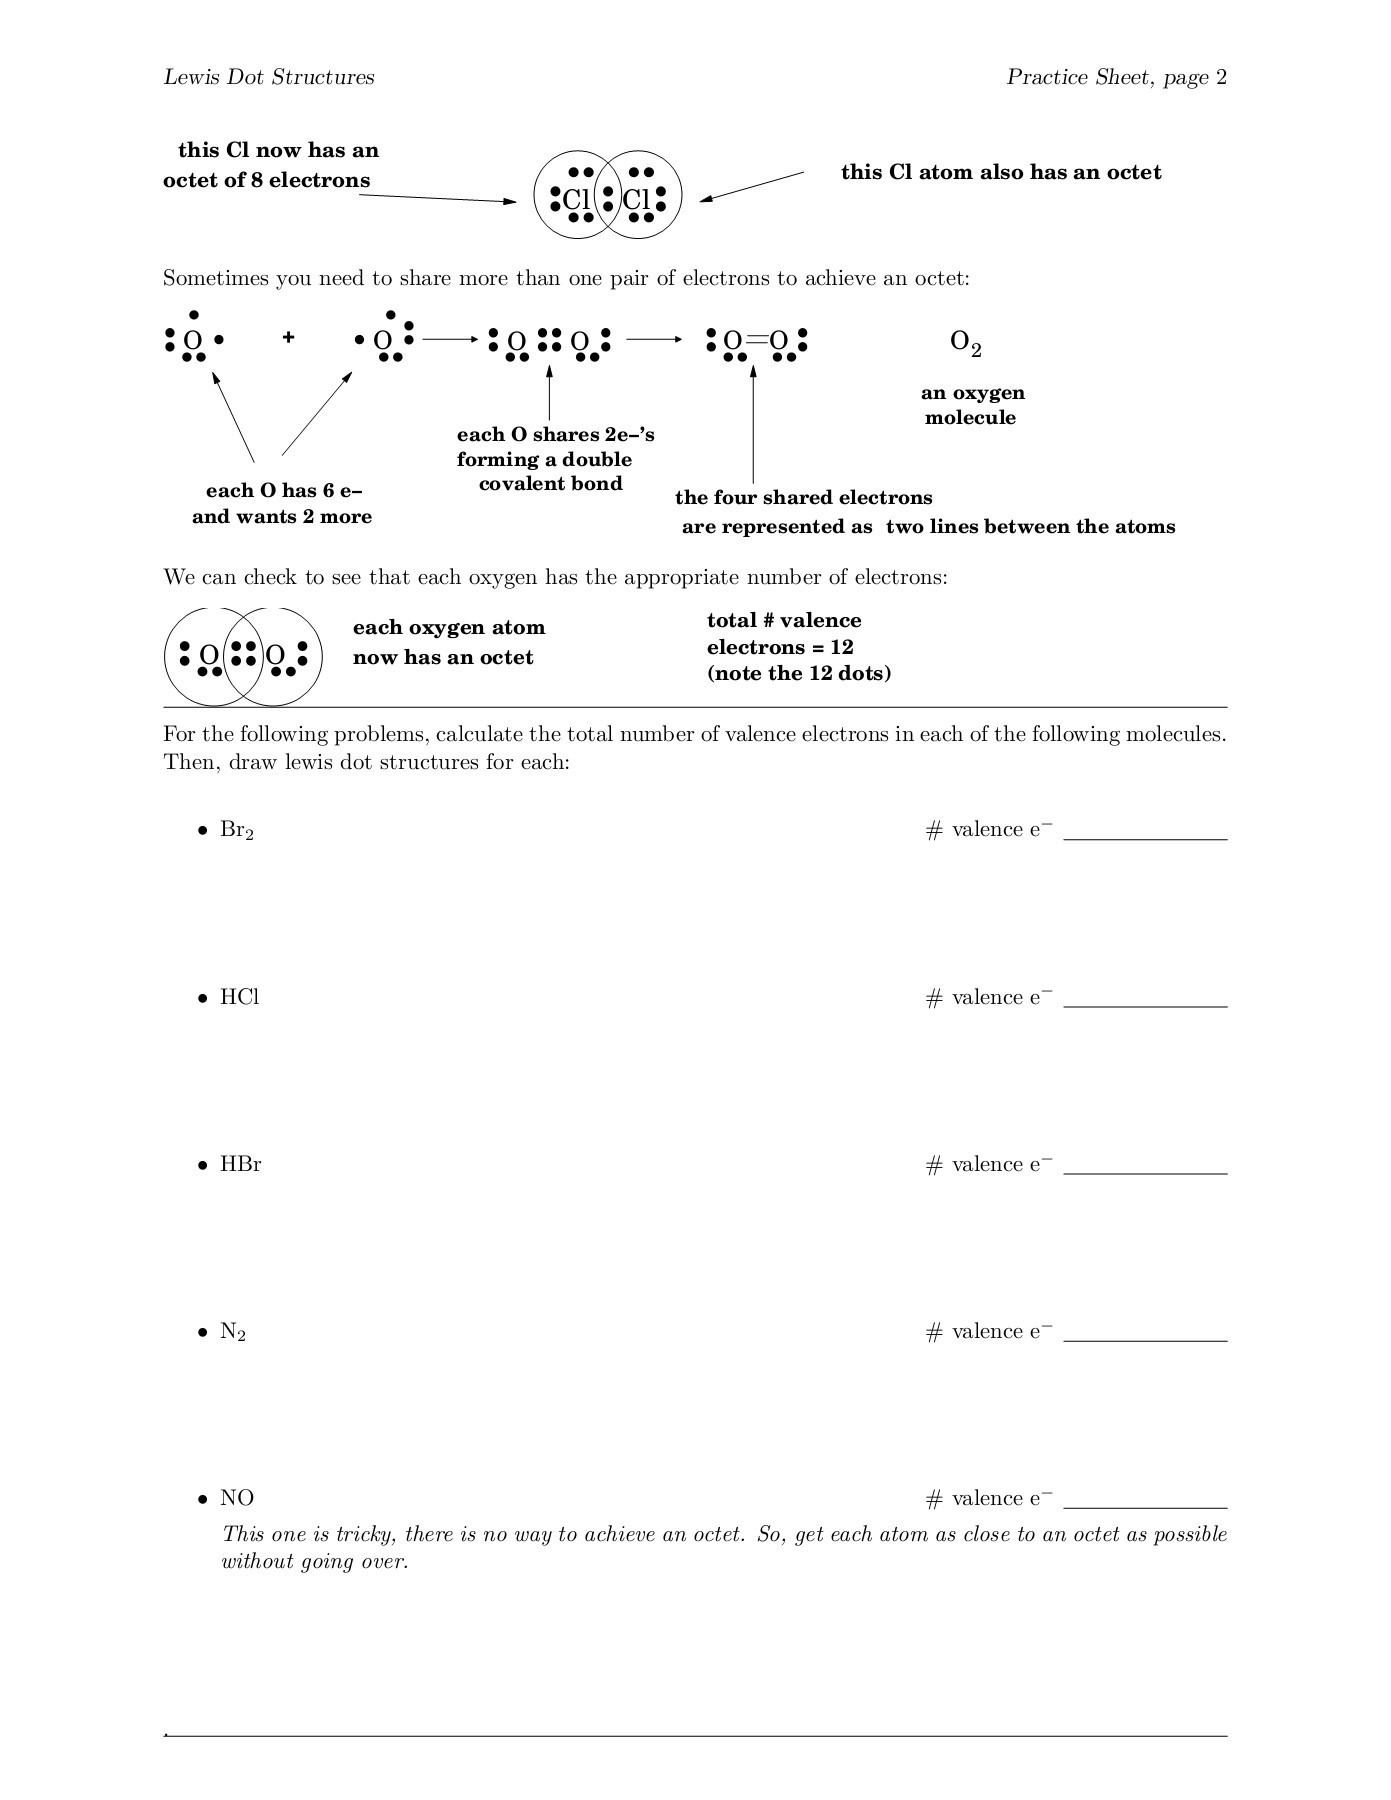 Lewis Structure Practice Worksheet Electron Dot Lewis Structures Pages 1 4 Text Version